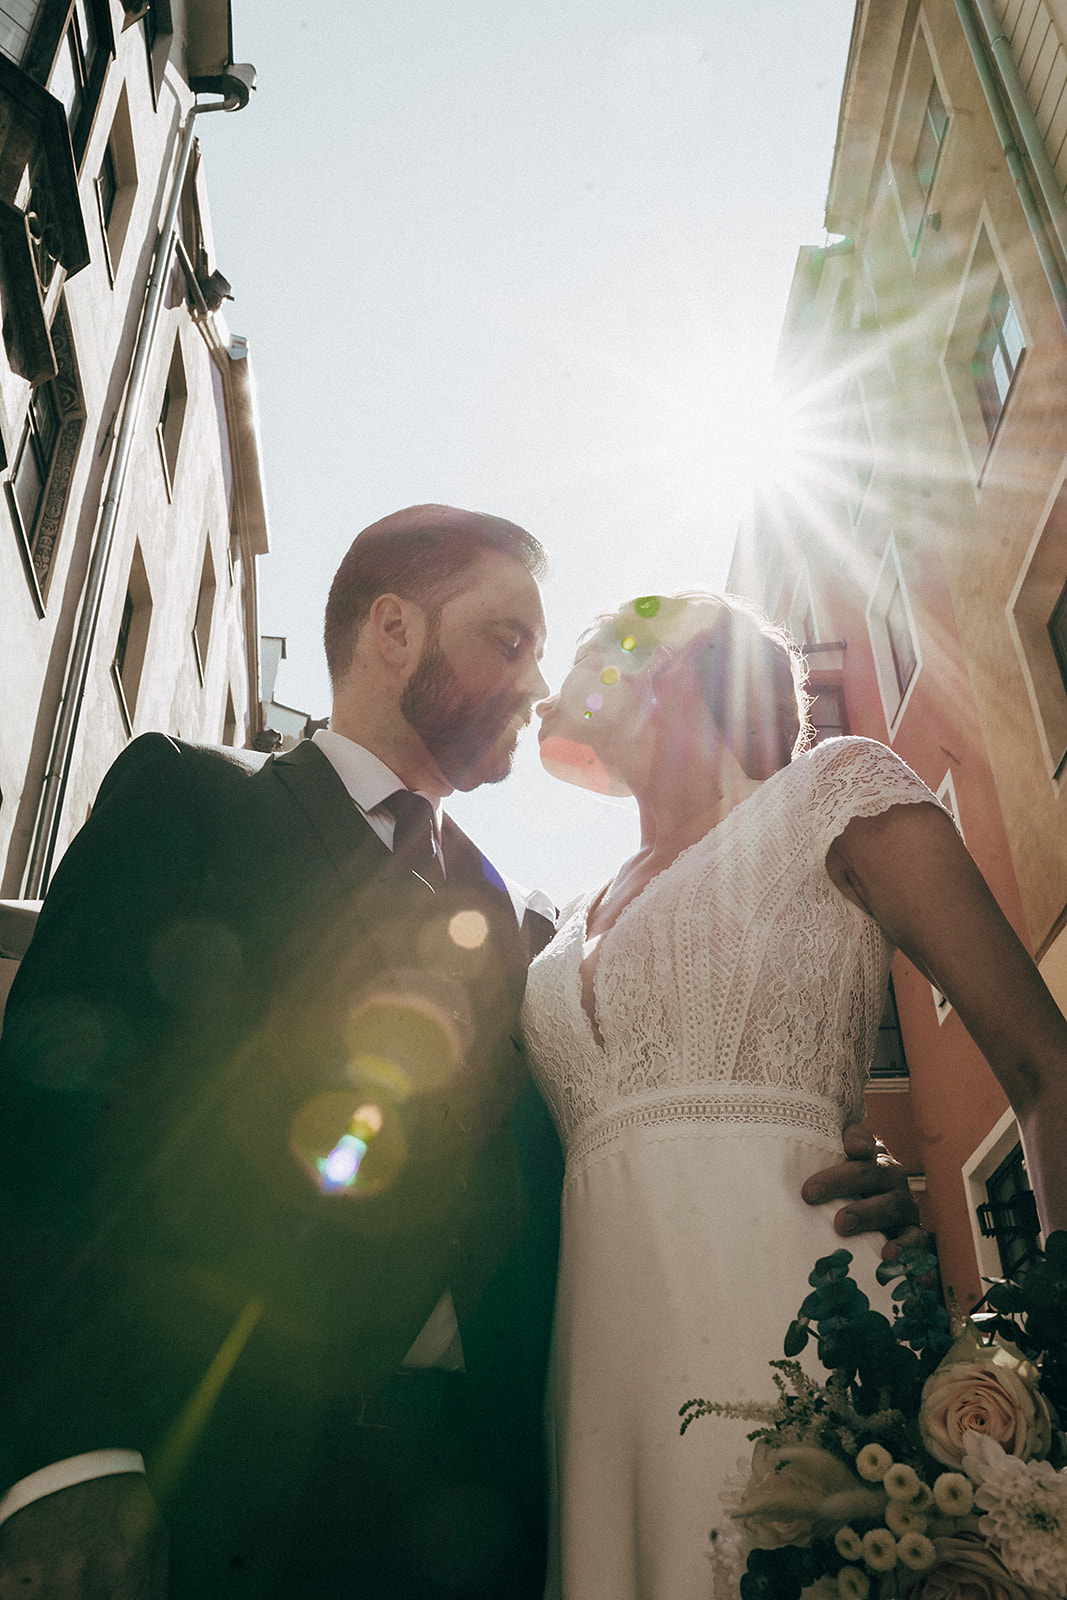 A bride and groom in the old town in city of Innsbruck in the Tyrol